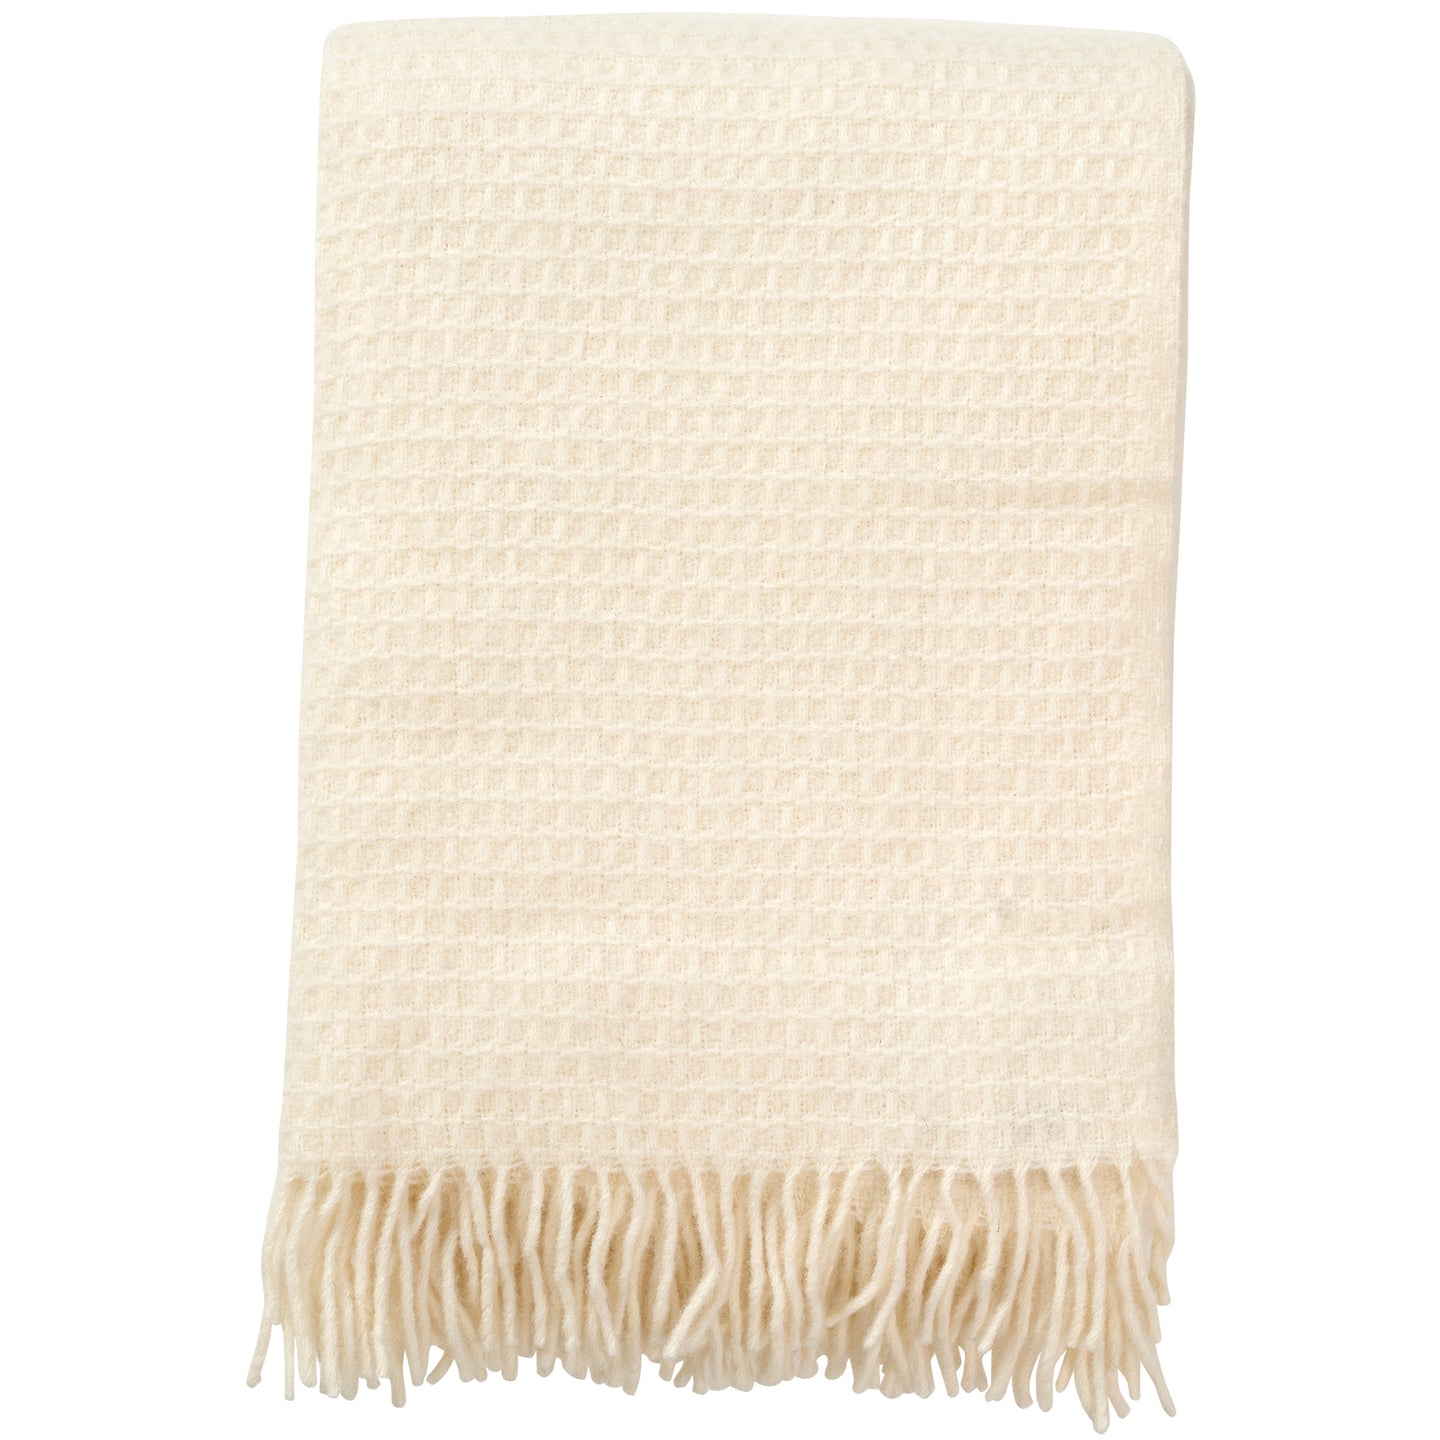 Knut Natural White Brushed Lambswool Throw